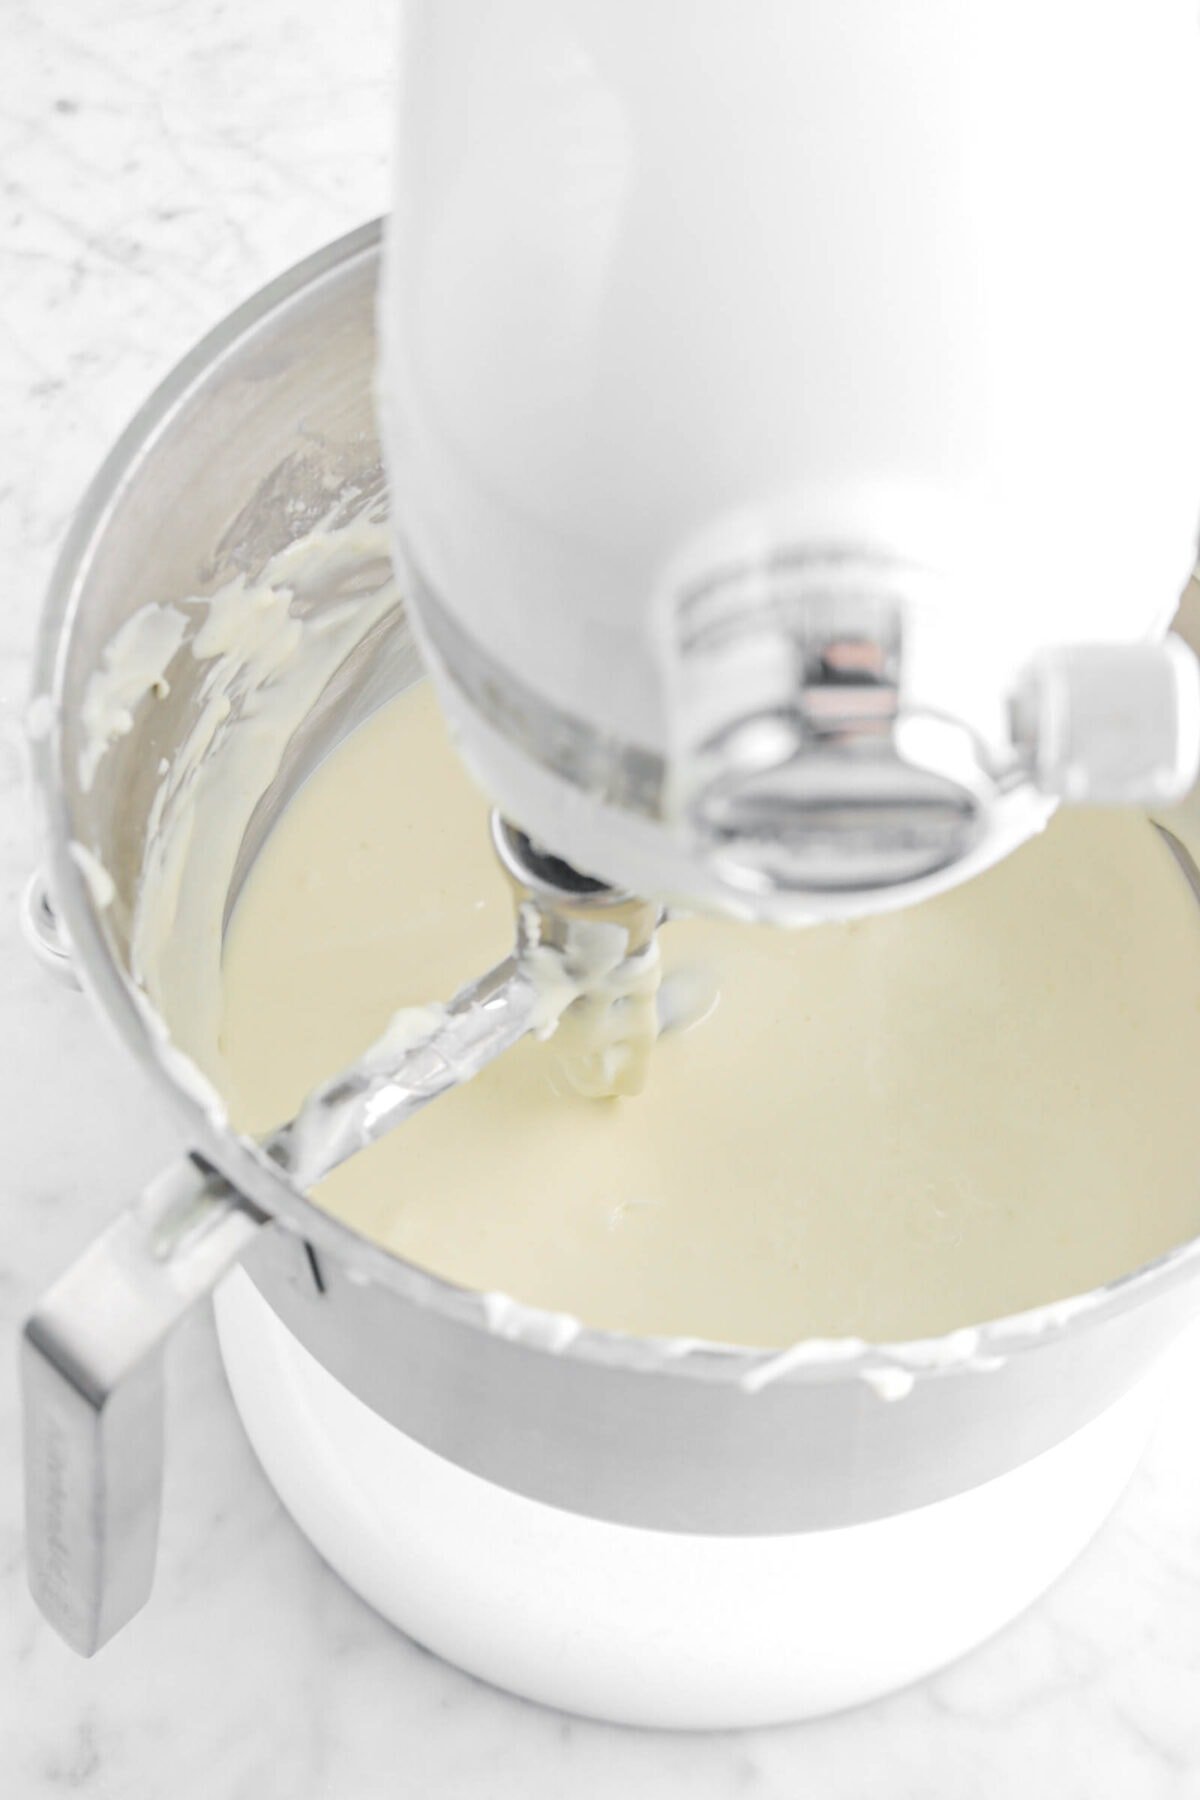 cheesecake filling in stand mixer on marble surface